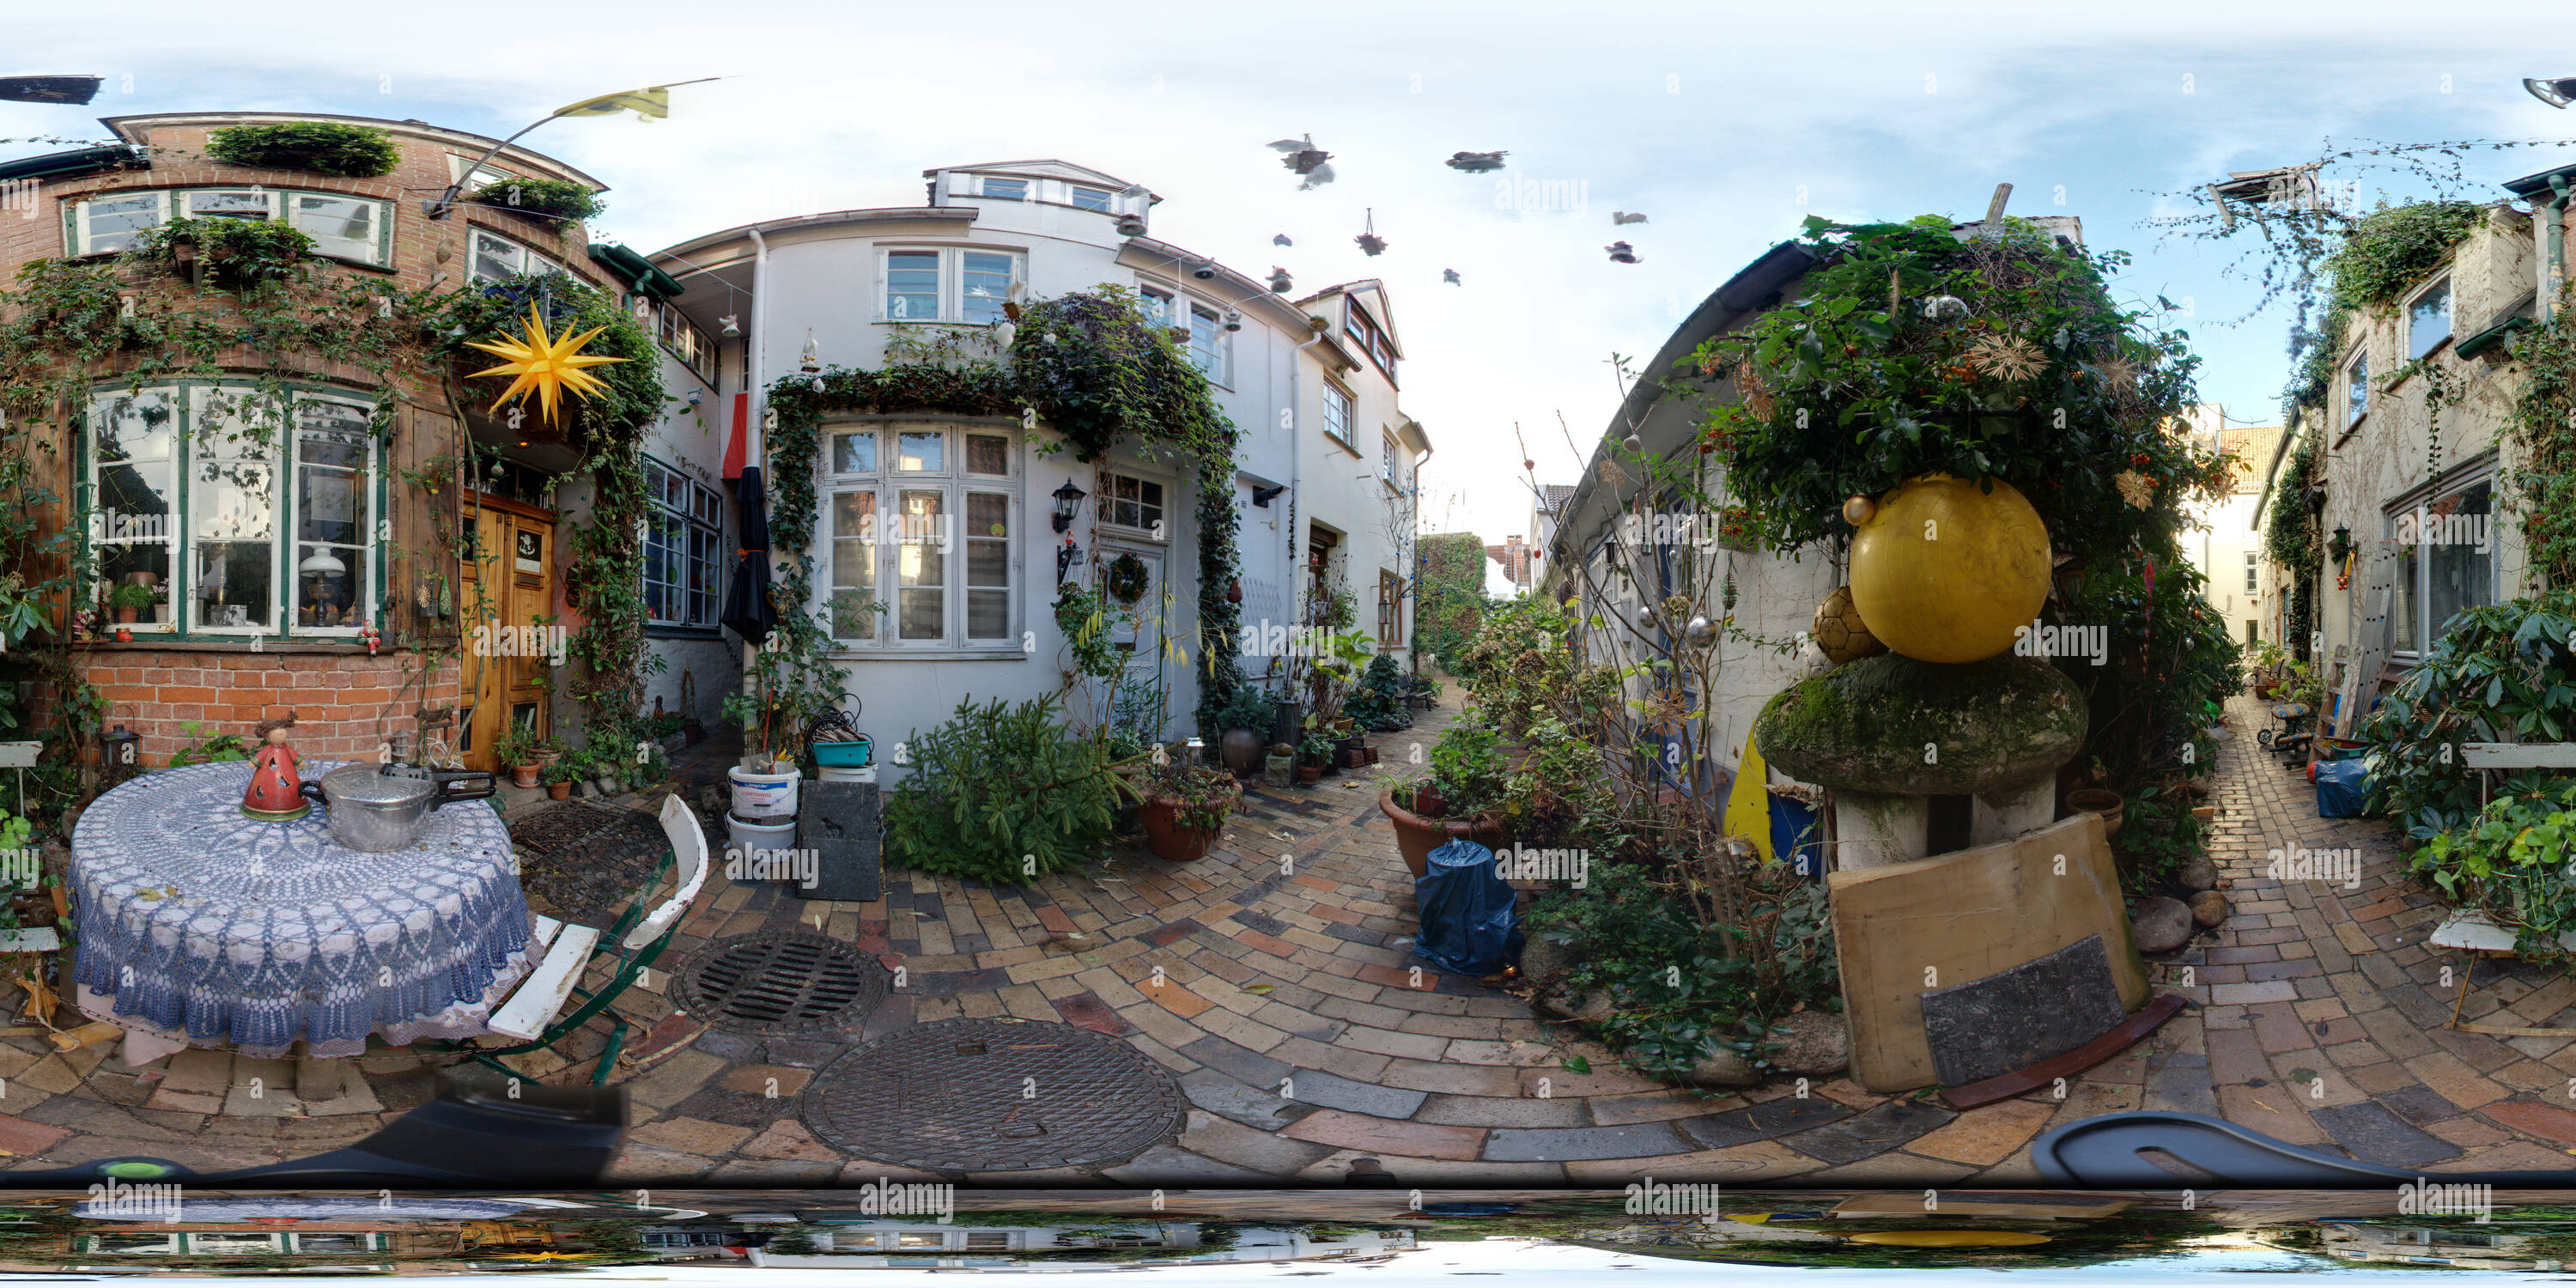 360 degree panoramic view of Lübeck - Hellgrüner Gang decorated for the Advent time